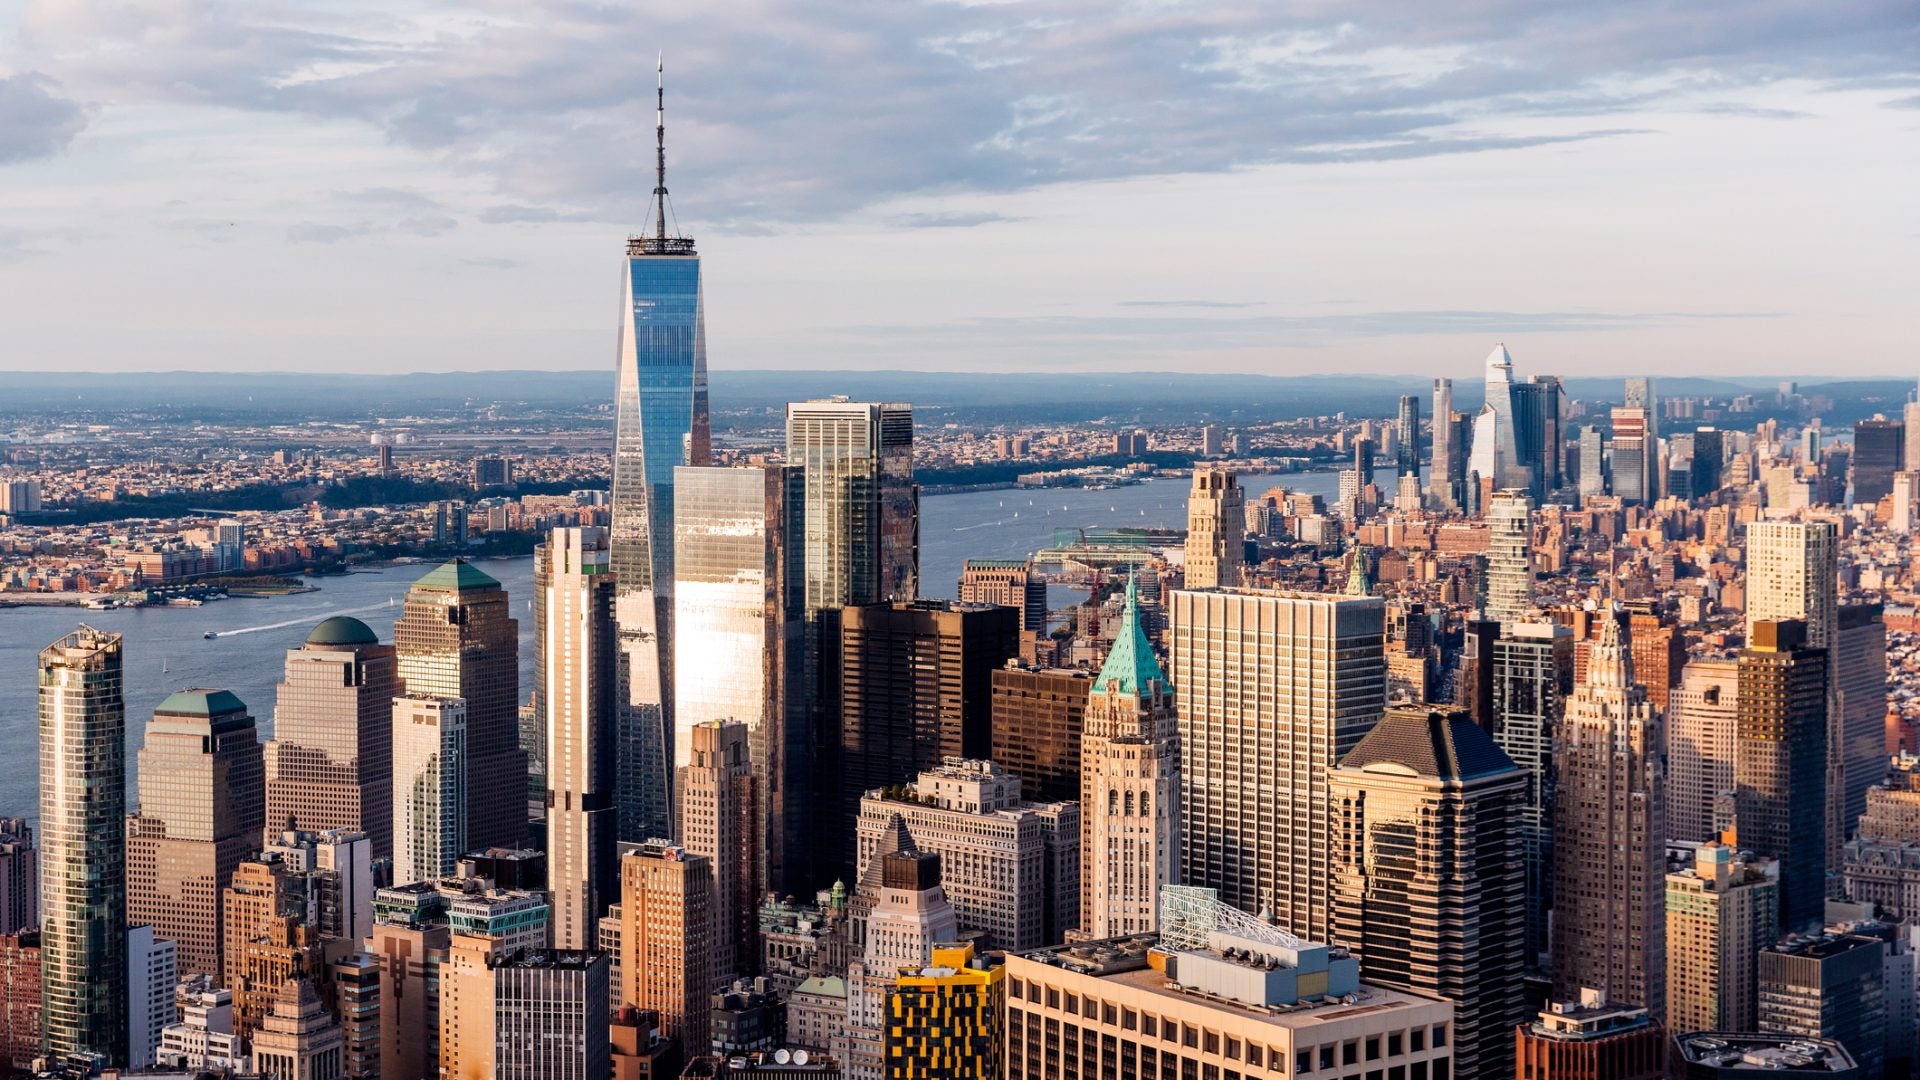 New York City Is Sinking From The Weight Of Its Buildings